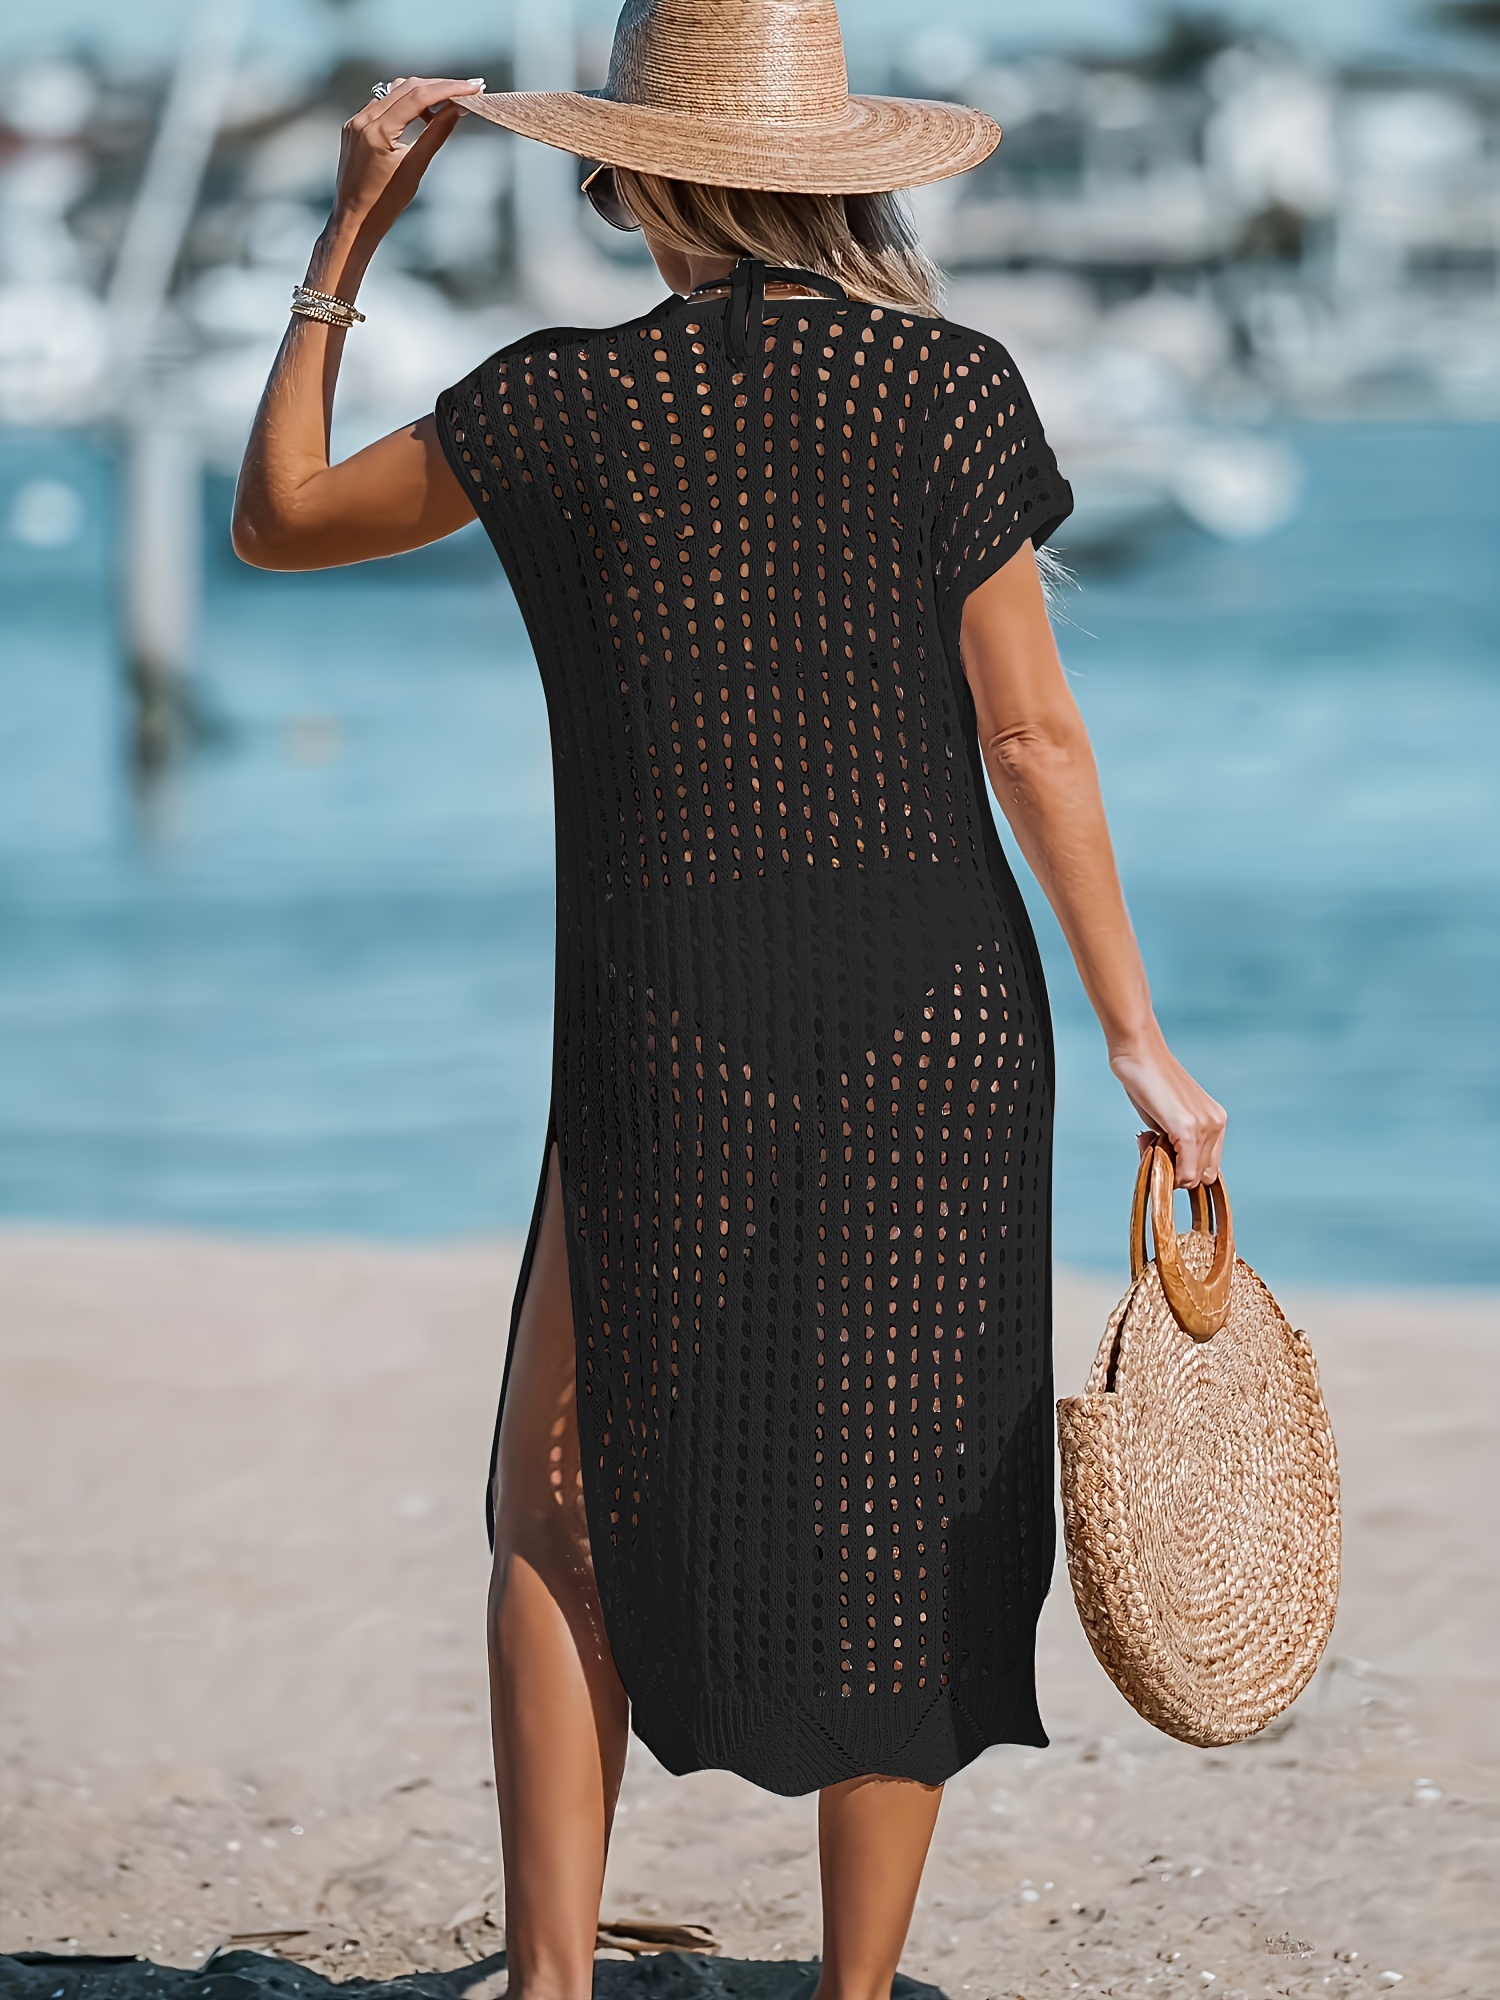 10 Best Sheer cover up ideas  sheer cover up, fashion, vacay outfits